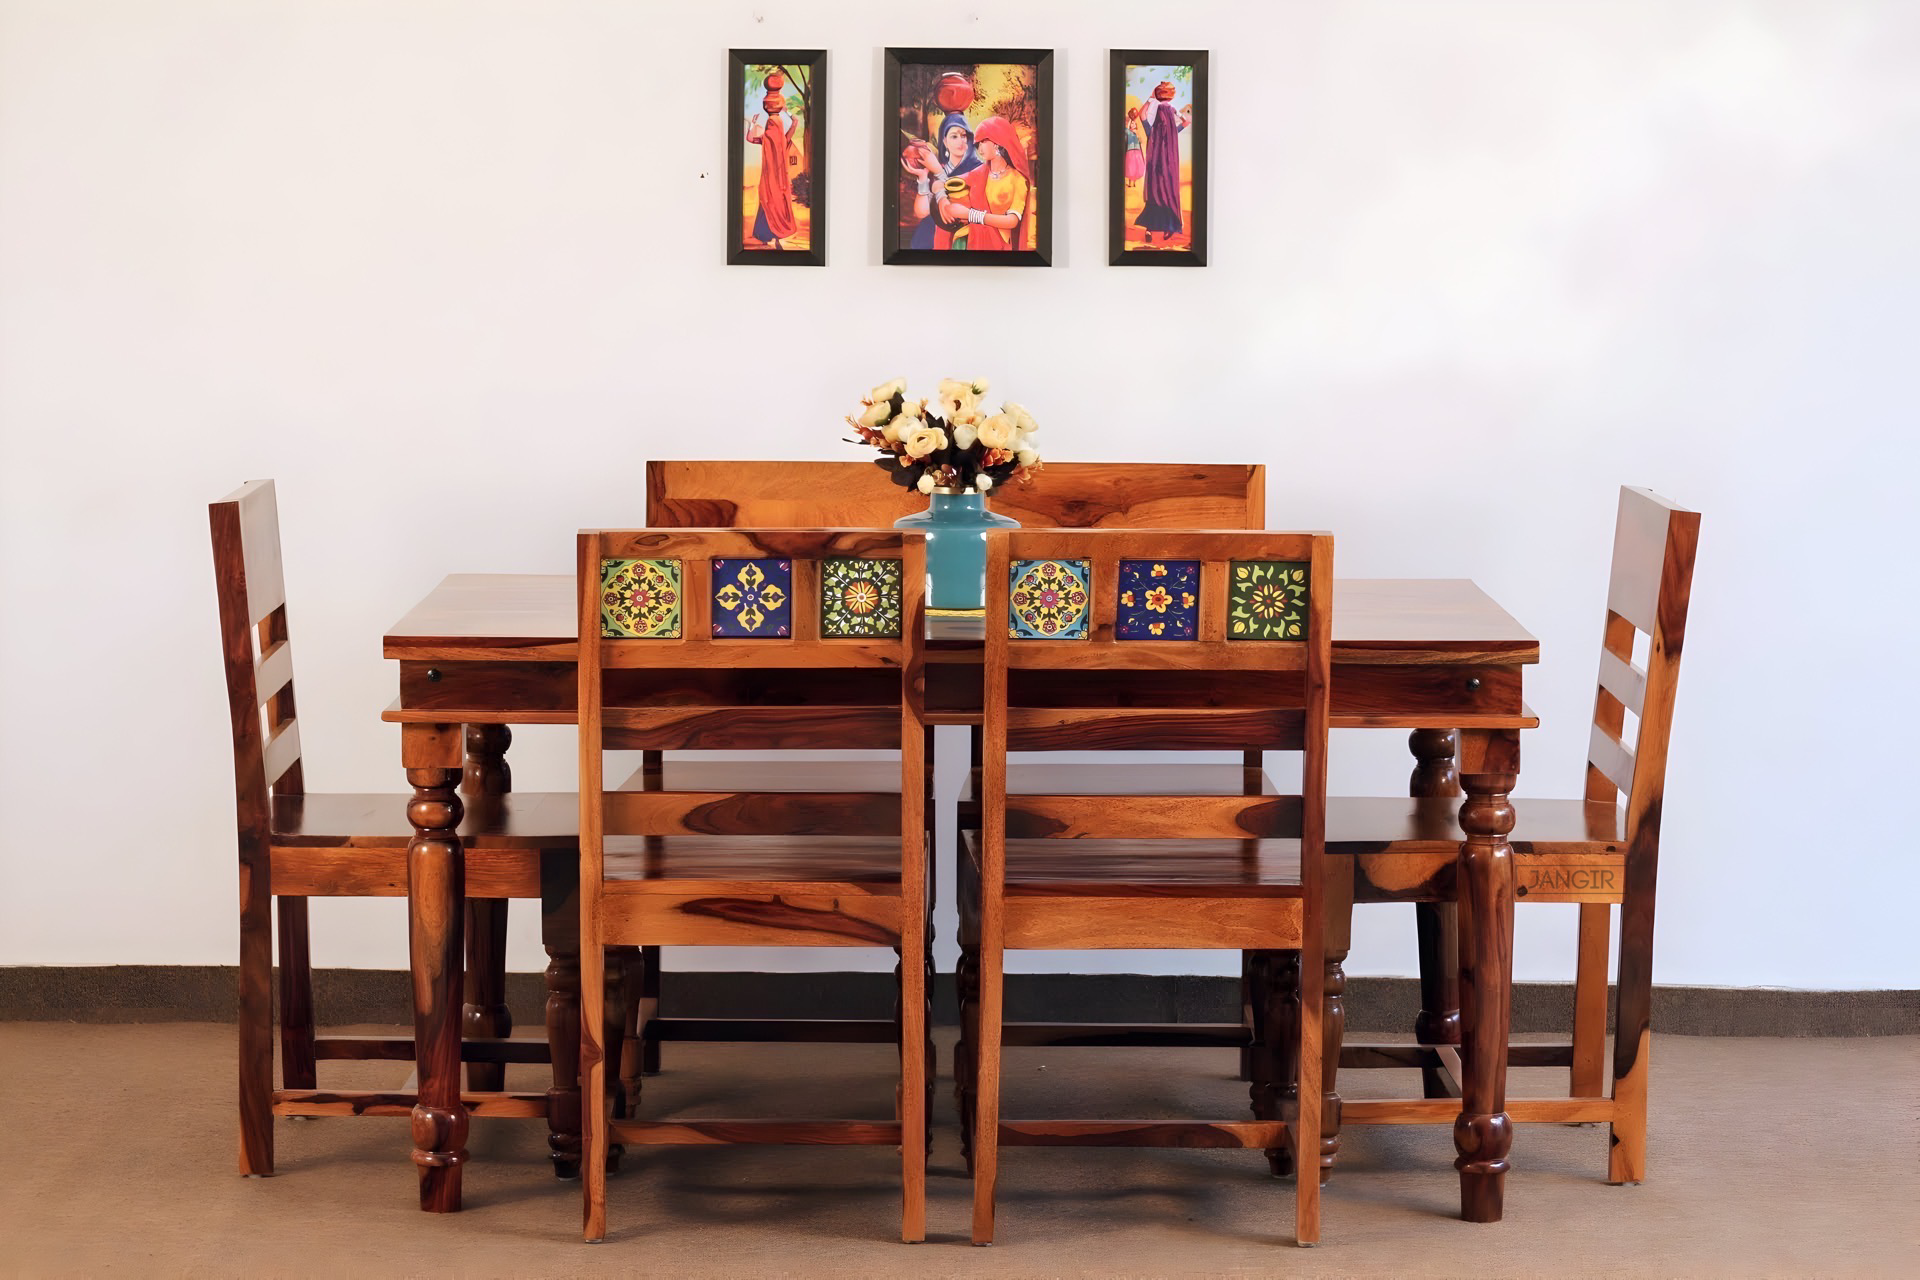 Discover the perfect tiles design to complement your dining room with our exceptional dining table sets, crafted from sheesham wood. Buy online for the perfect combination of beauty and durability!